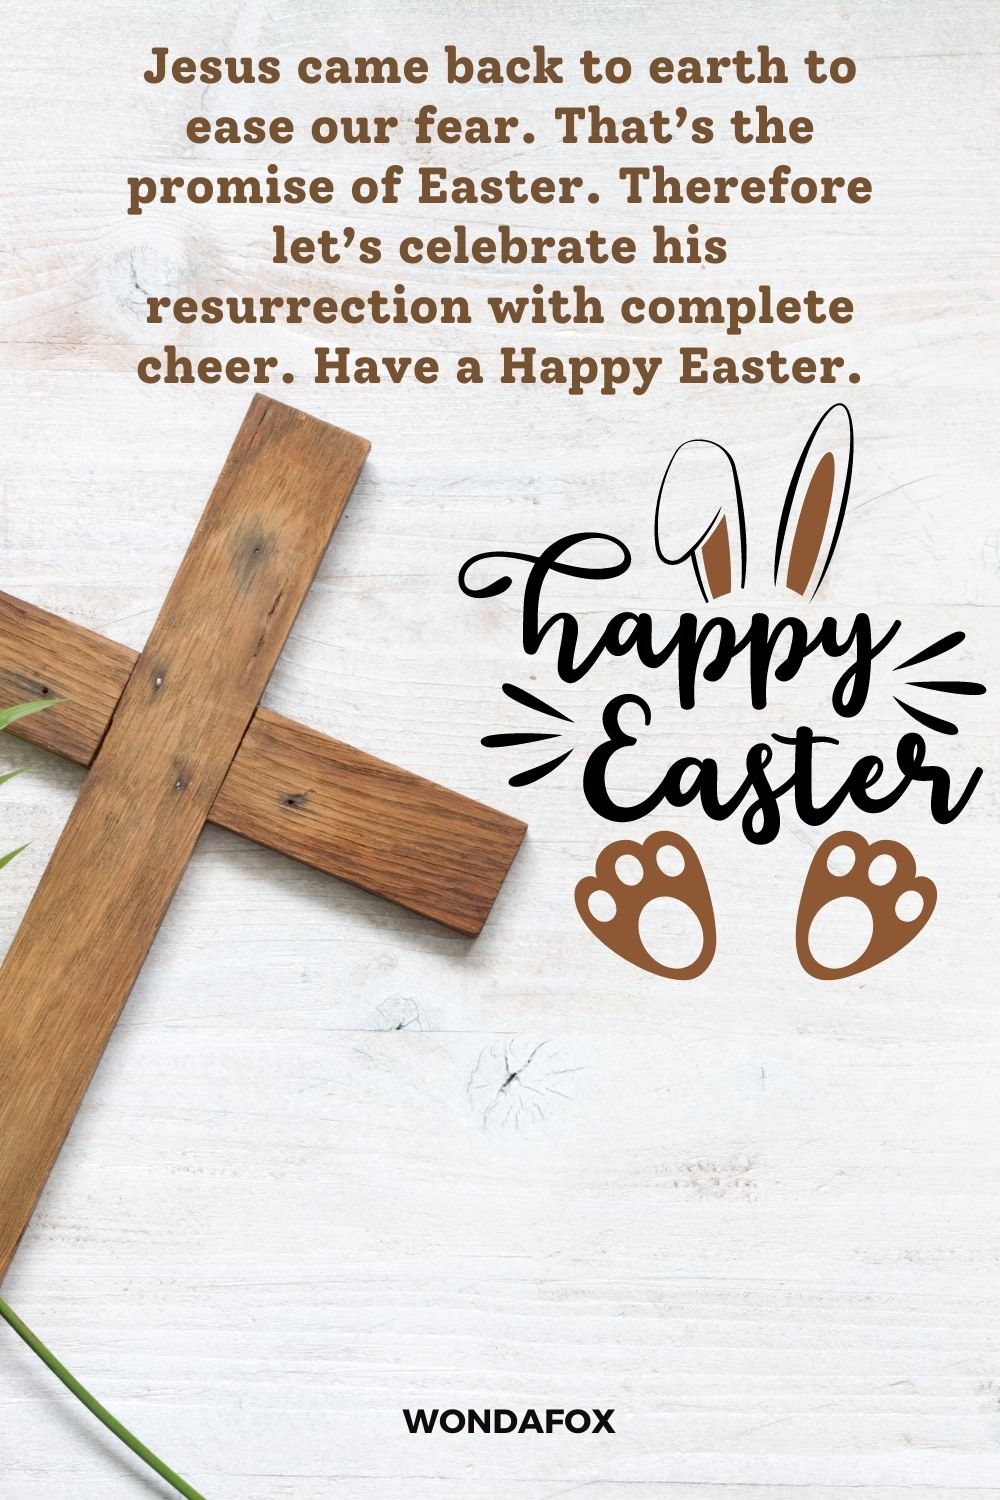 Jesus came back to earth to ease our fear. That’s the promise of Easter. Therefore let’s celebrate his resurrection with complete cheer. Have a Happy Easter.